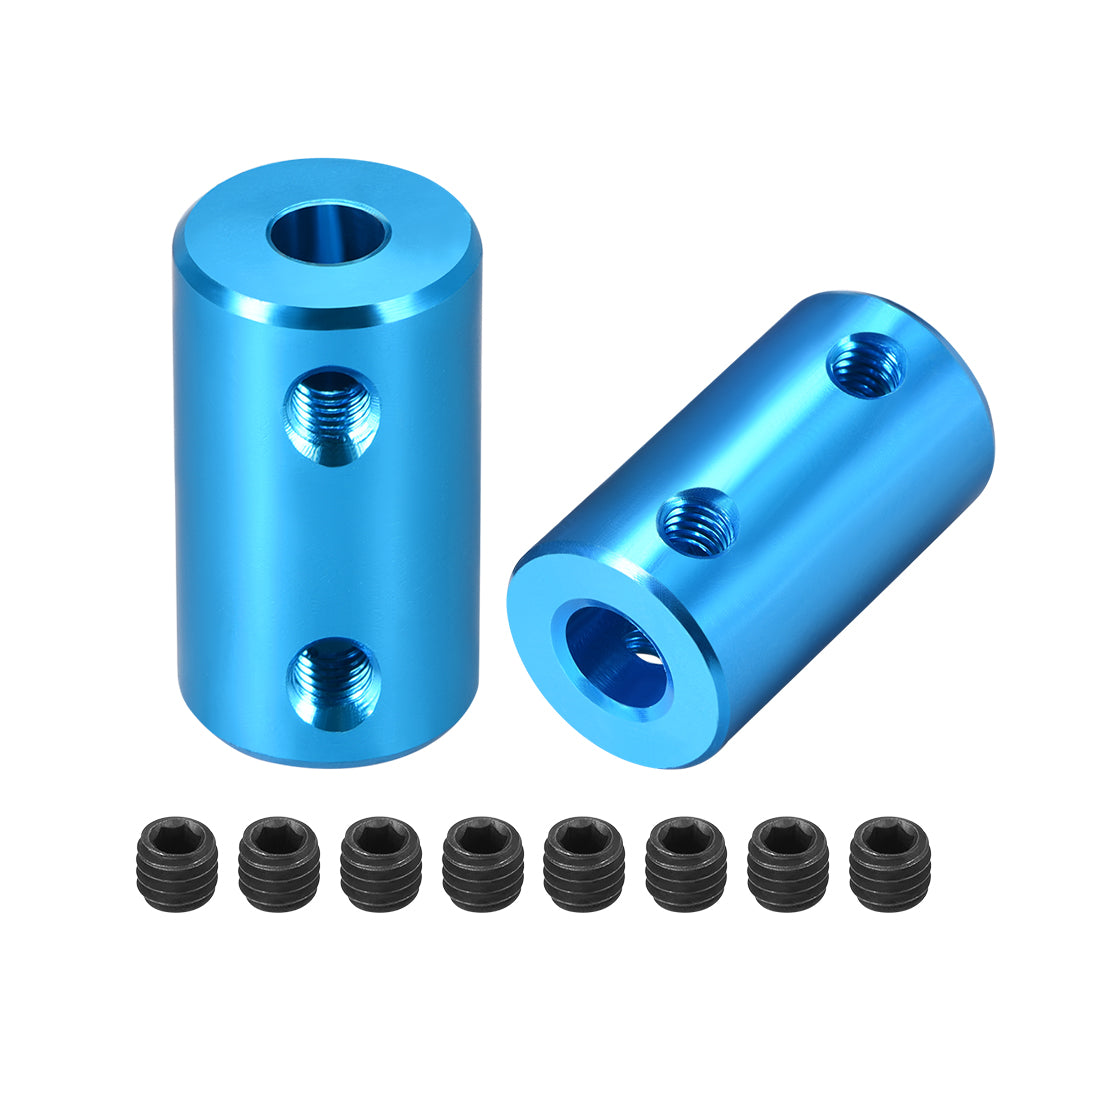 uxcell Uxcell Shaft Coupling 5mm to 6mm Bore L25xD14 Robot Motor Wheel Rigid Coupler Connector Blue 2pcs